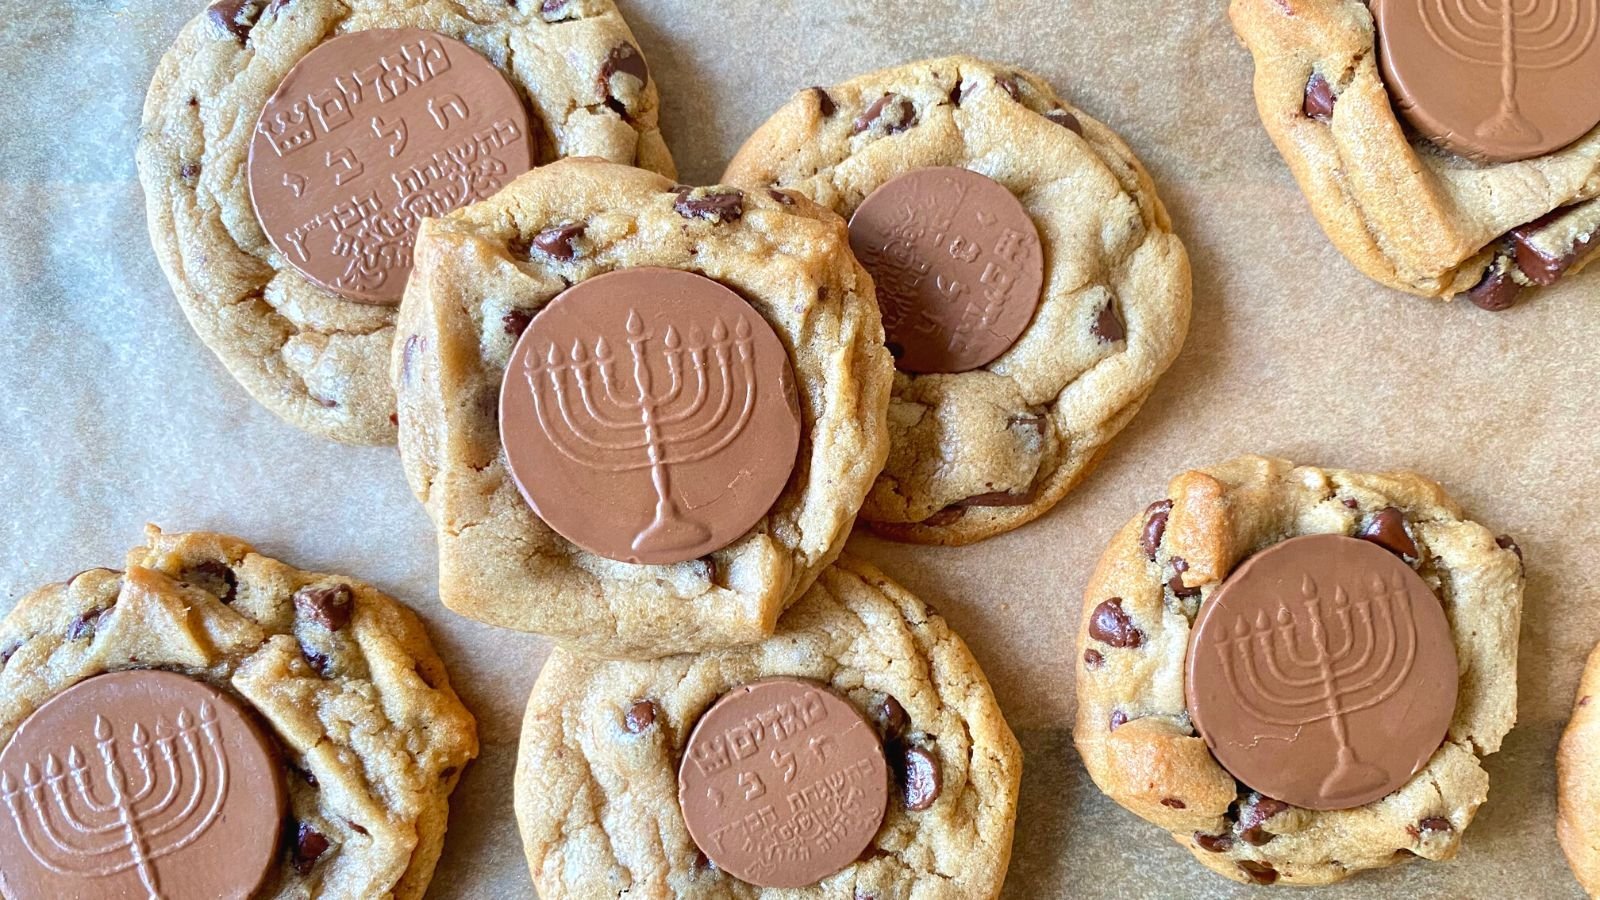 A Delicious and Light-Filled Hanukkah, by Tastemaker Shannon Sarna